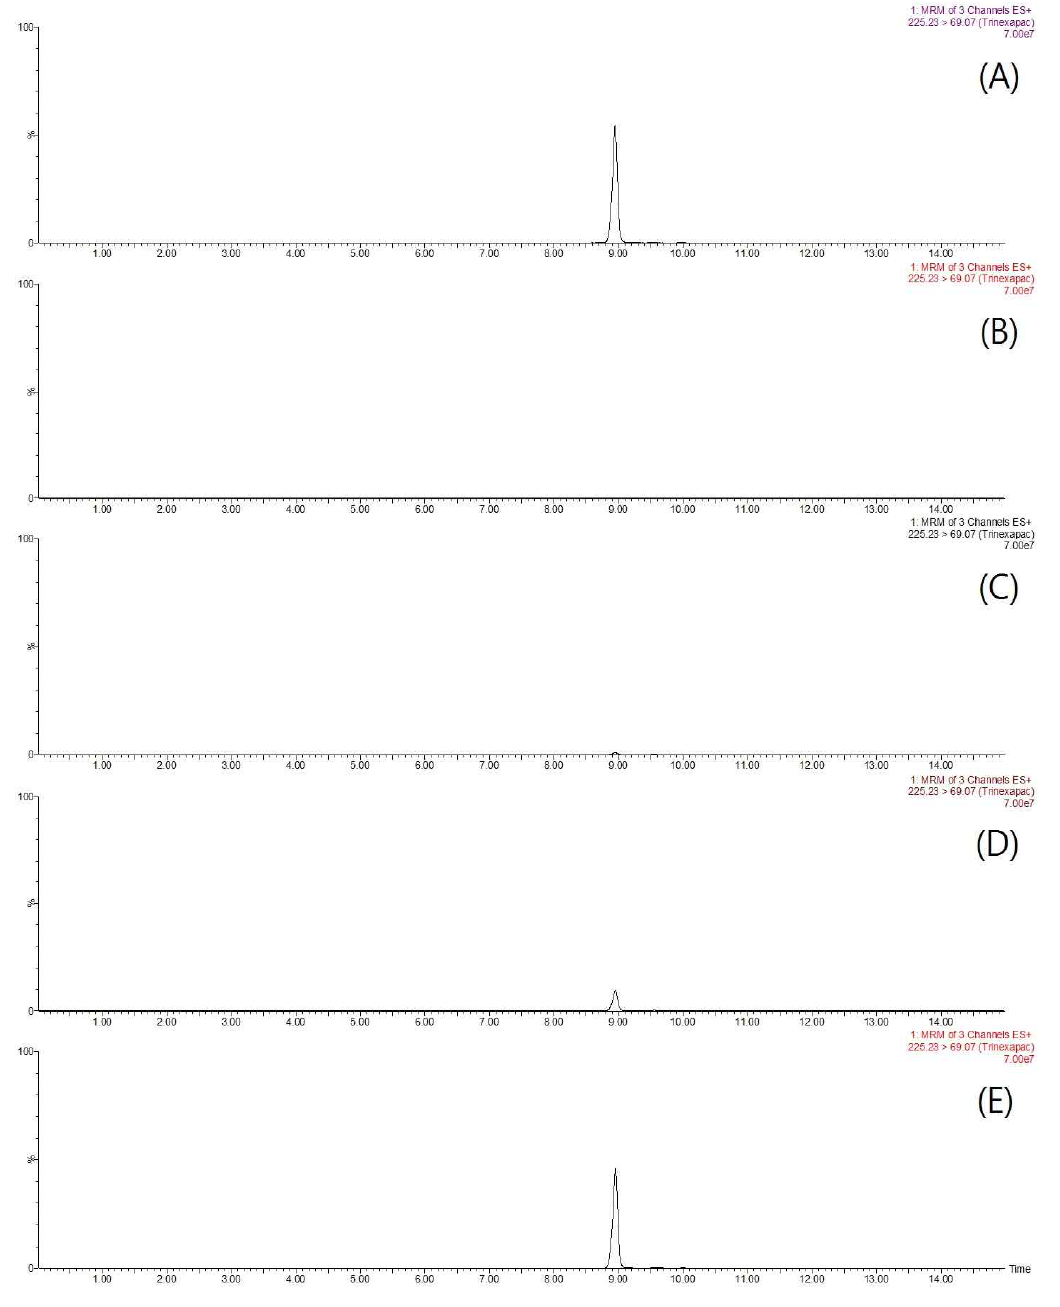 Representative MRM (quantification ion) chromatograms of trinexapac corresponding to: A, standard solution at 0.5 mg/kg; B, control potato; C, spiked at 0.01 mg/kg; D, spiked at 0.1 mg/kg; and E, spiked at 0.5 mg/kg